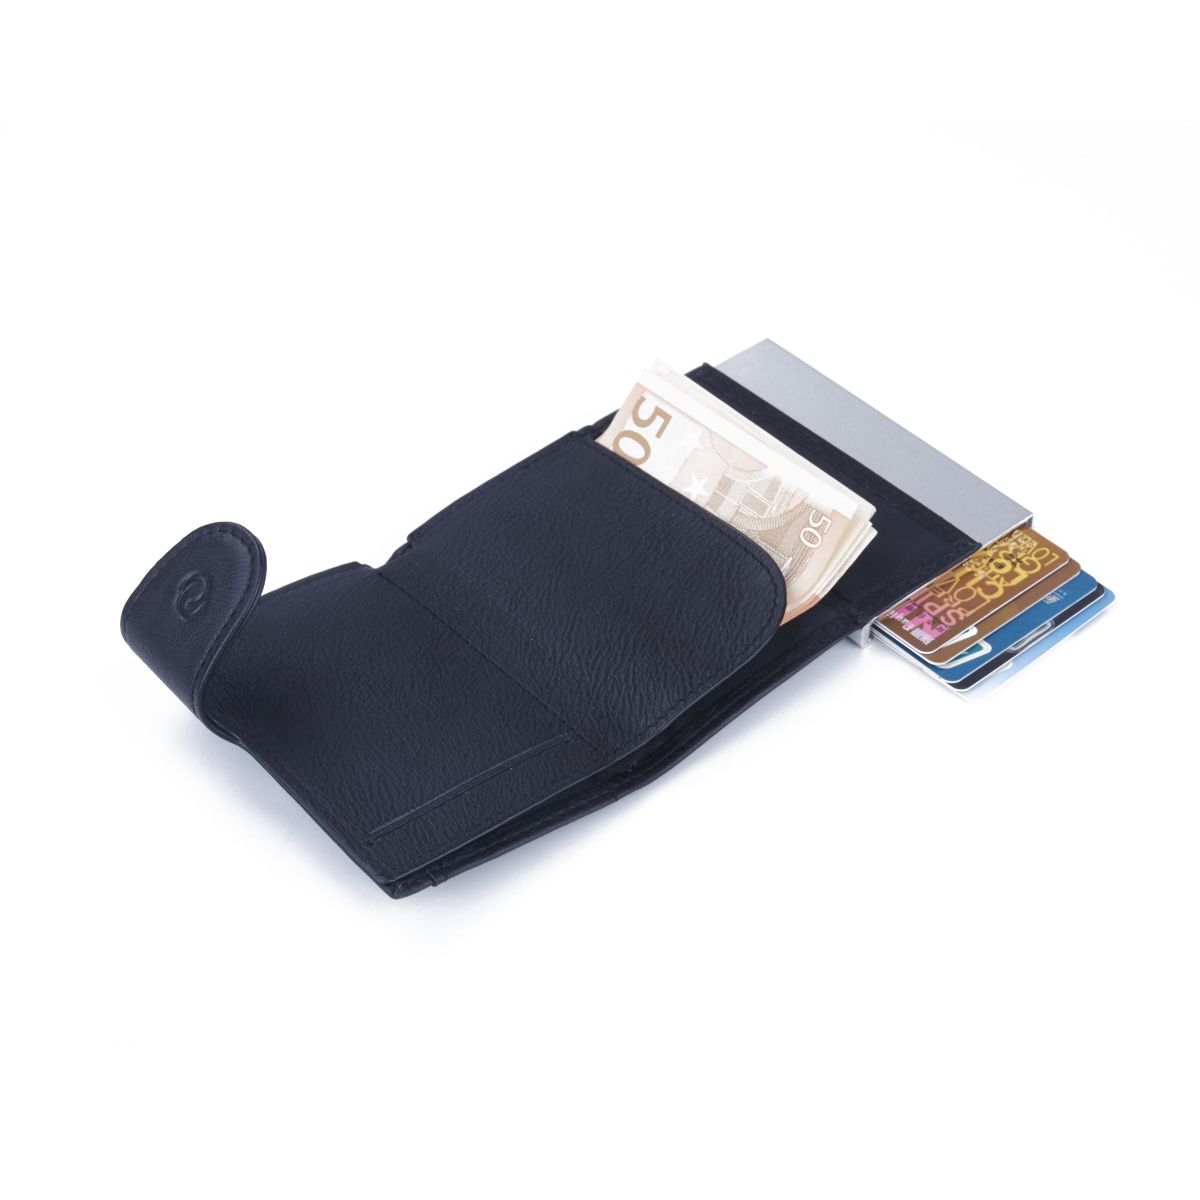 C-Secure Slim Aluminum Card Holder with Cork - Brown